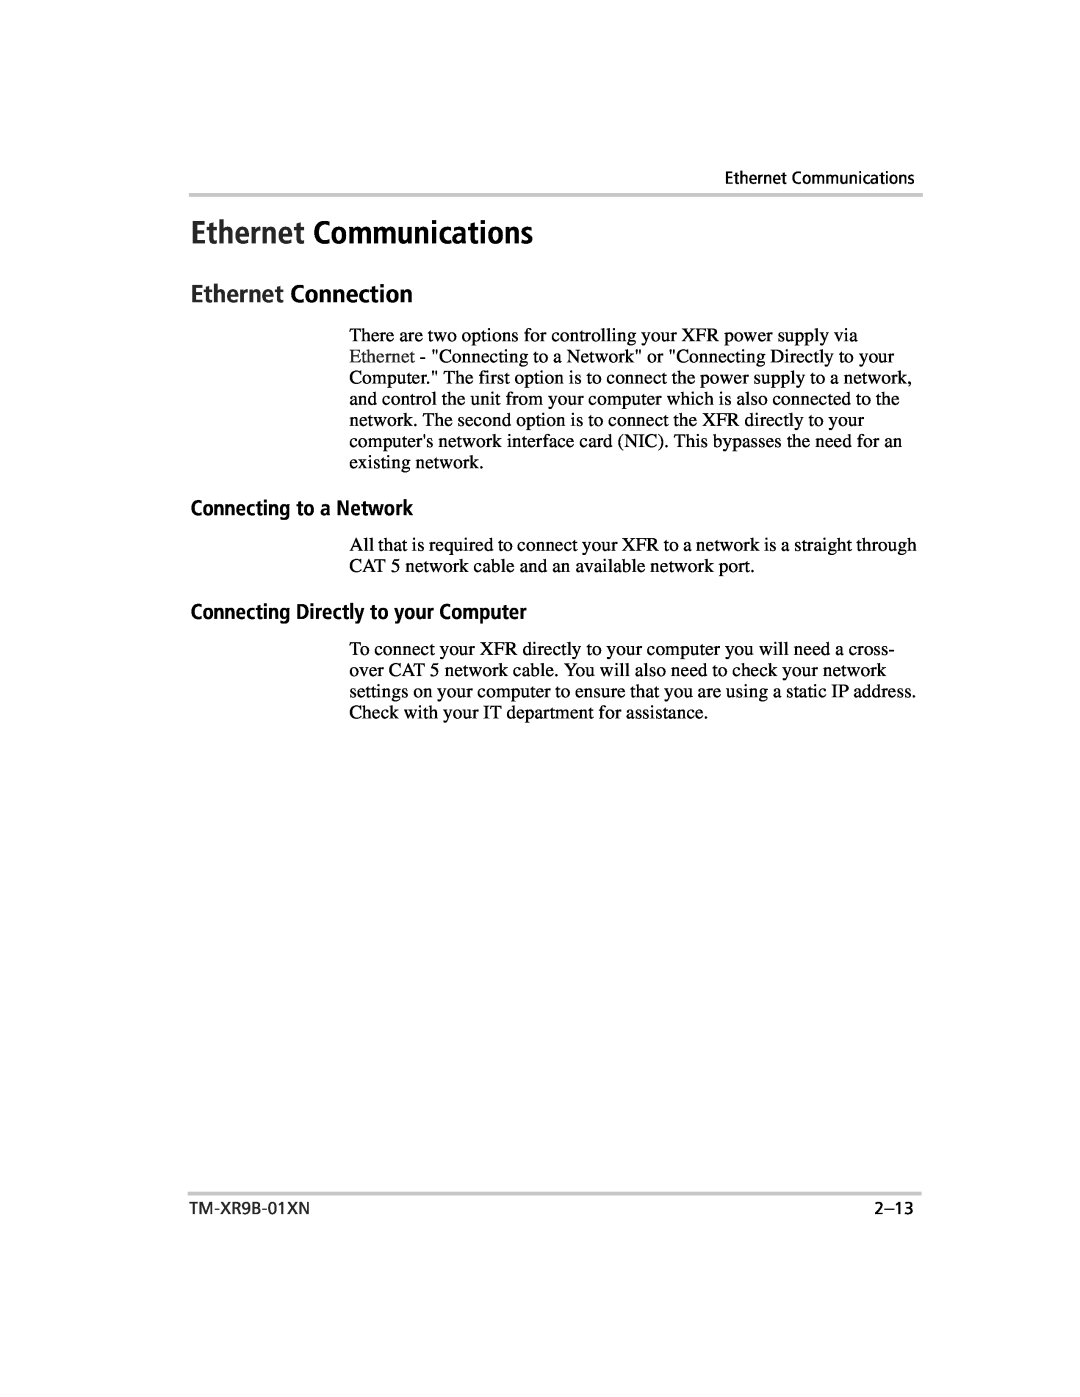 Xantrex Technology ENET-XFR3 manual Ethernet Communications, Ethernet Connection, Connecting to a Network 